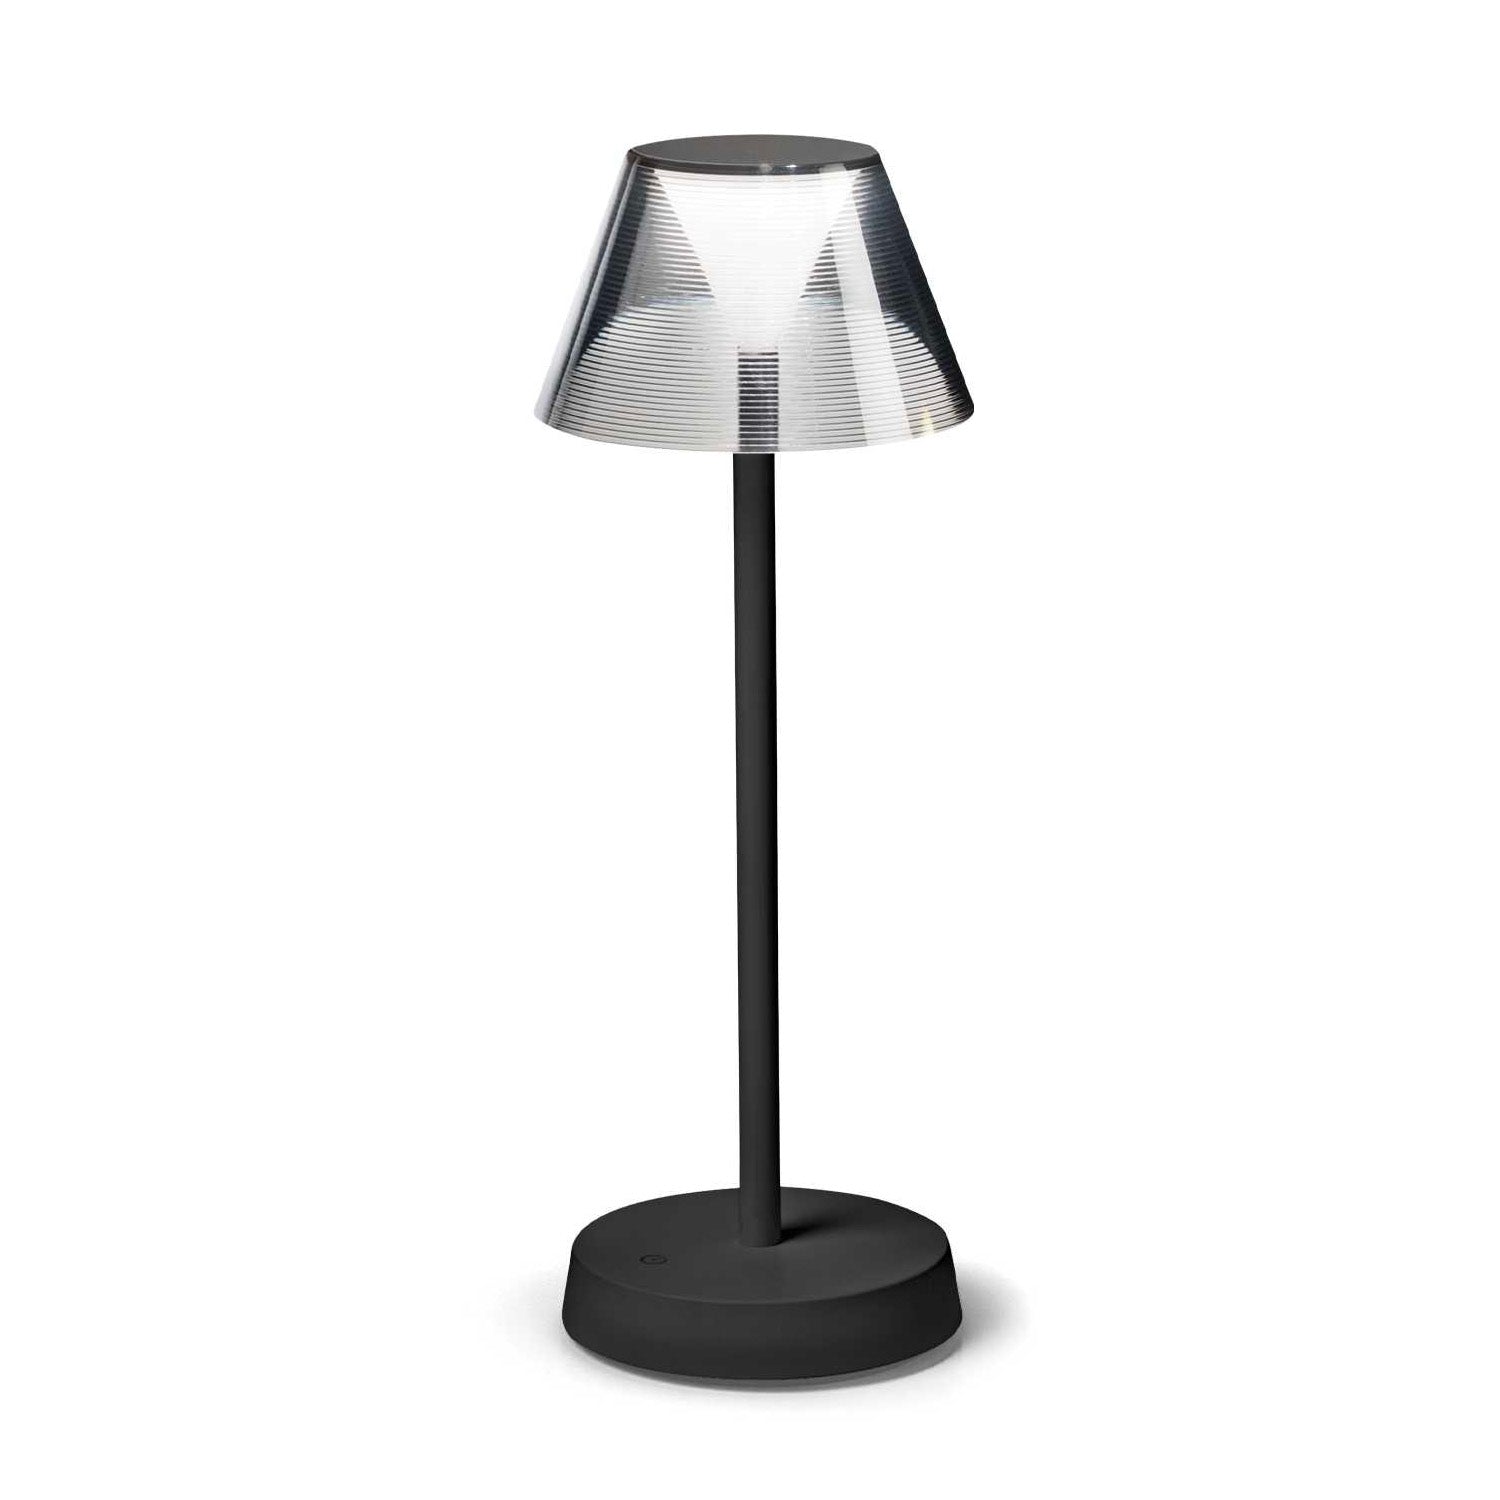 LOLITA - Portable cordless lamp with integrated LED